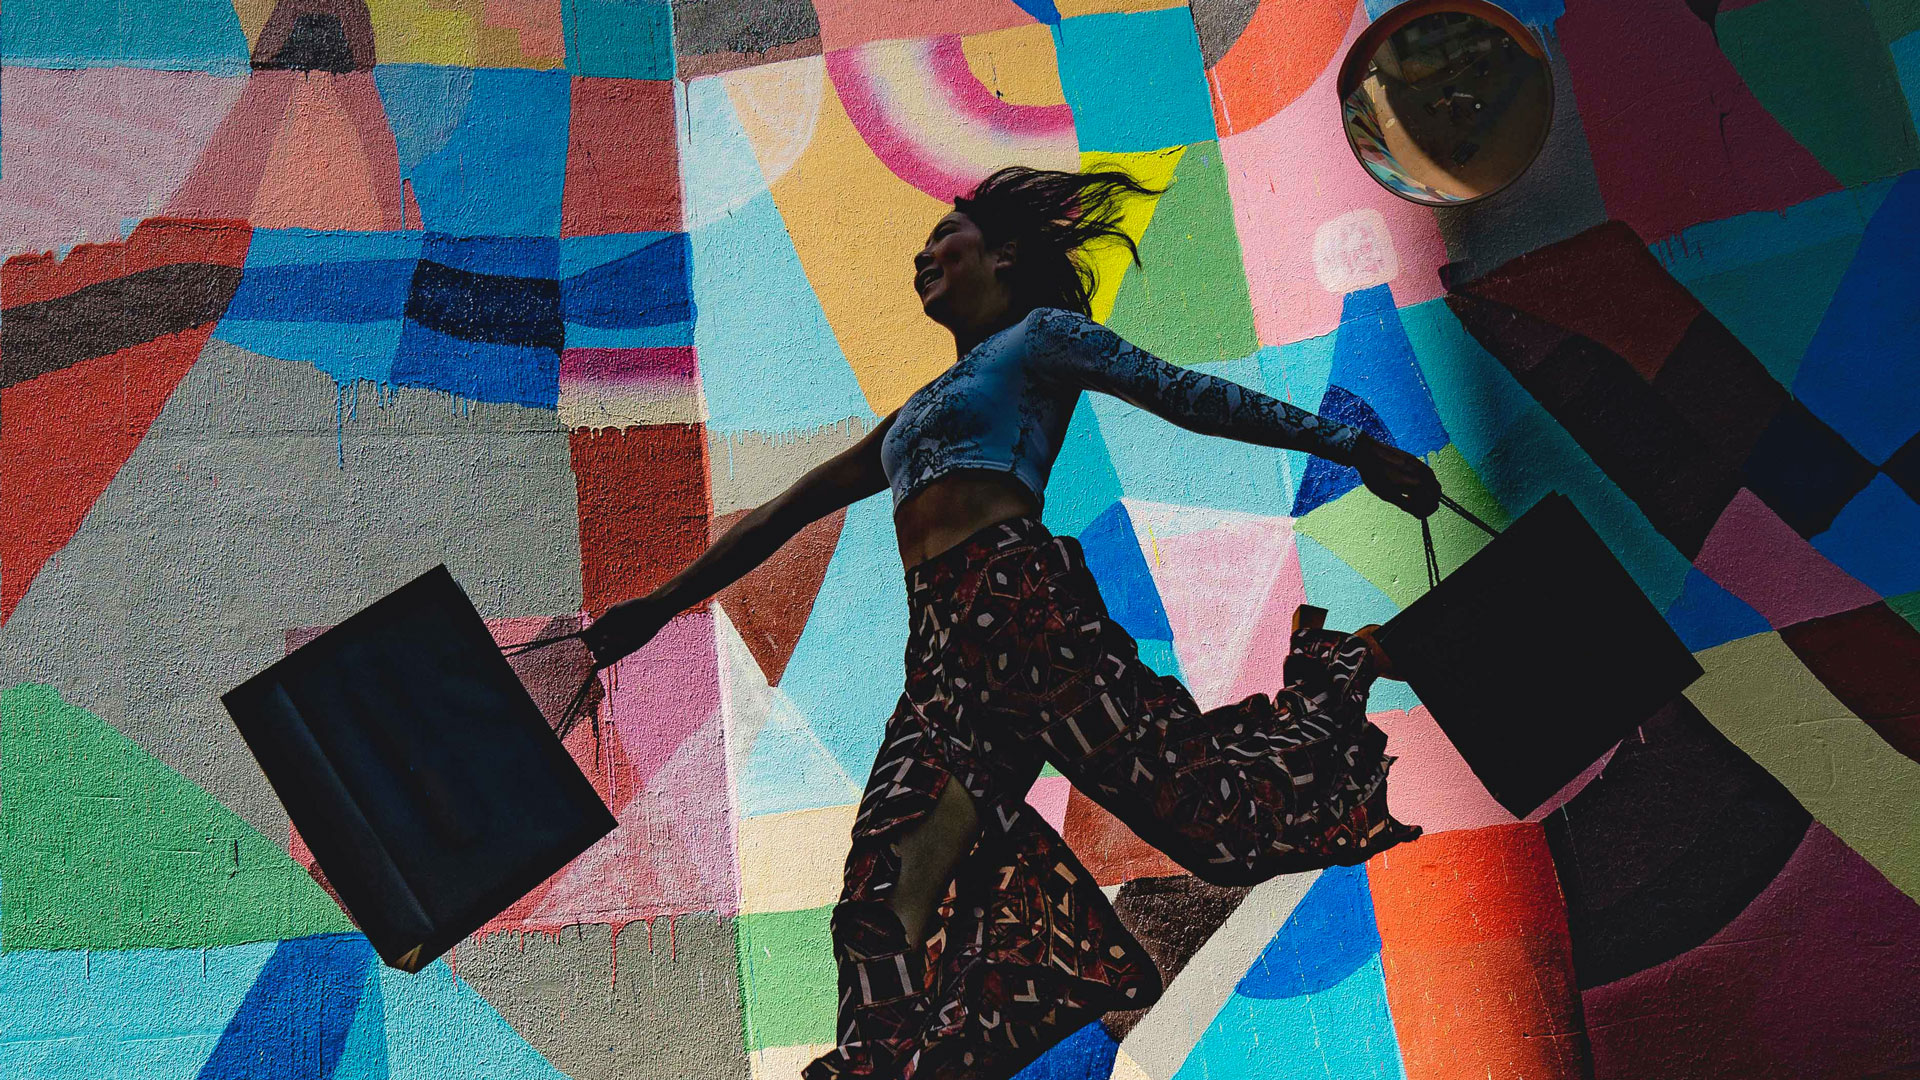 woman skipping and holding two shopping bags in front of colorful, abstract mural.